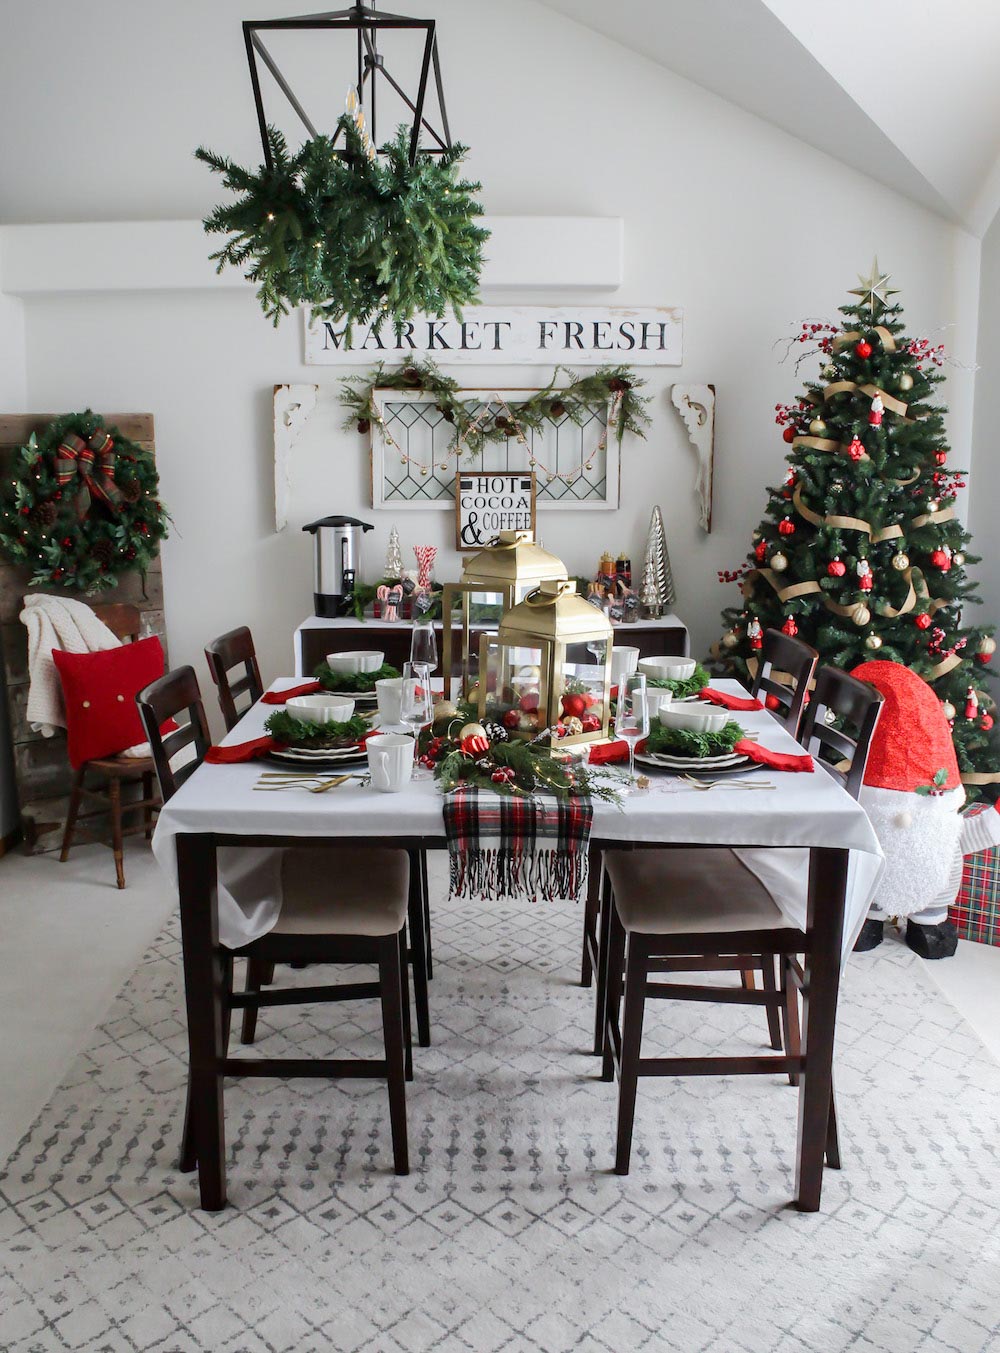 Centered dining room table decorated with holiday decor with Christmas tree in the back right corner